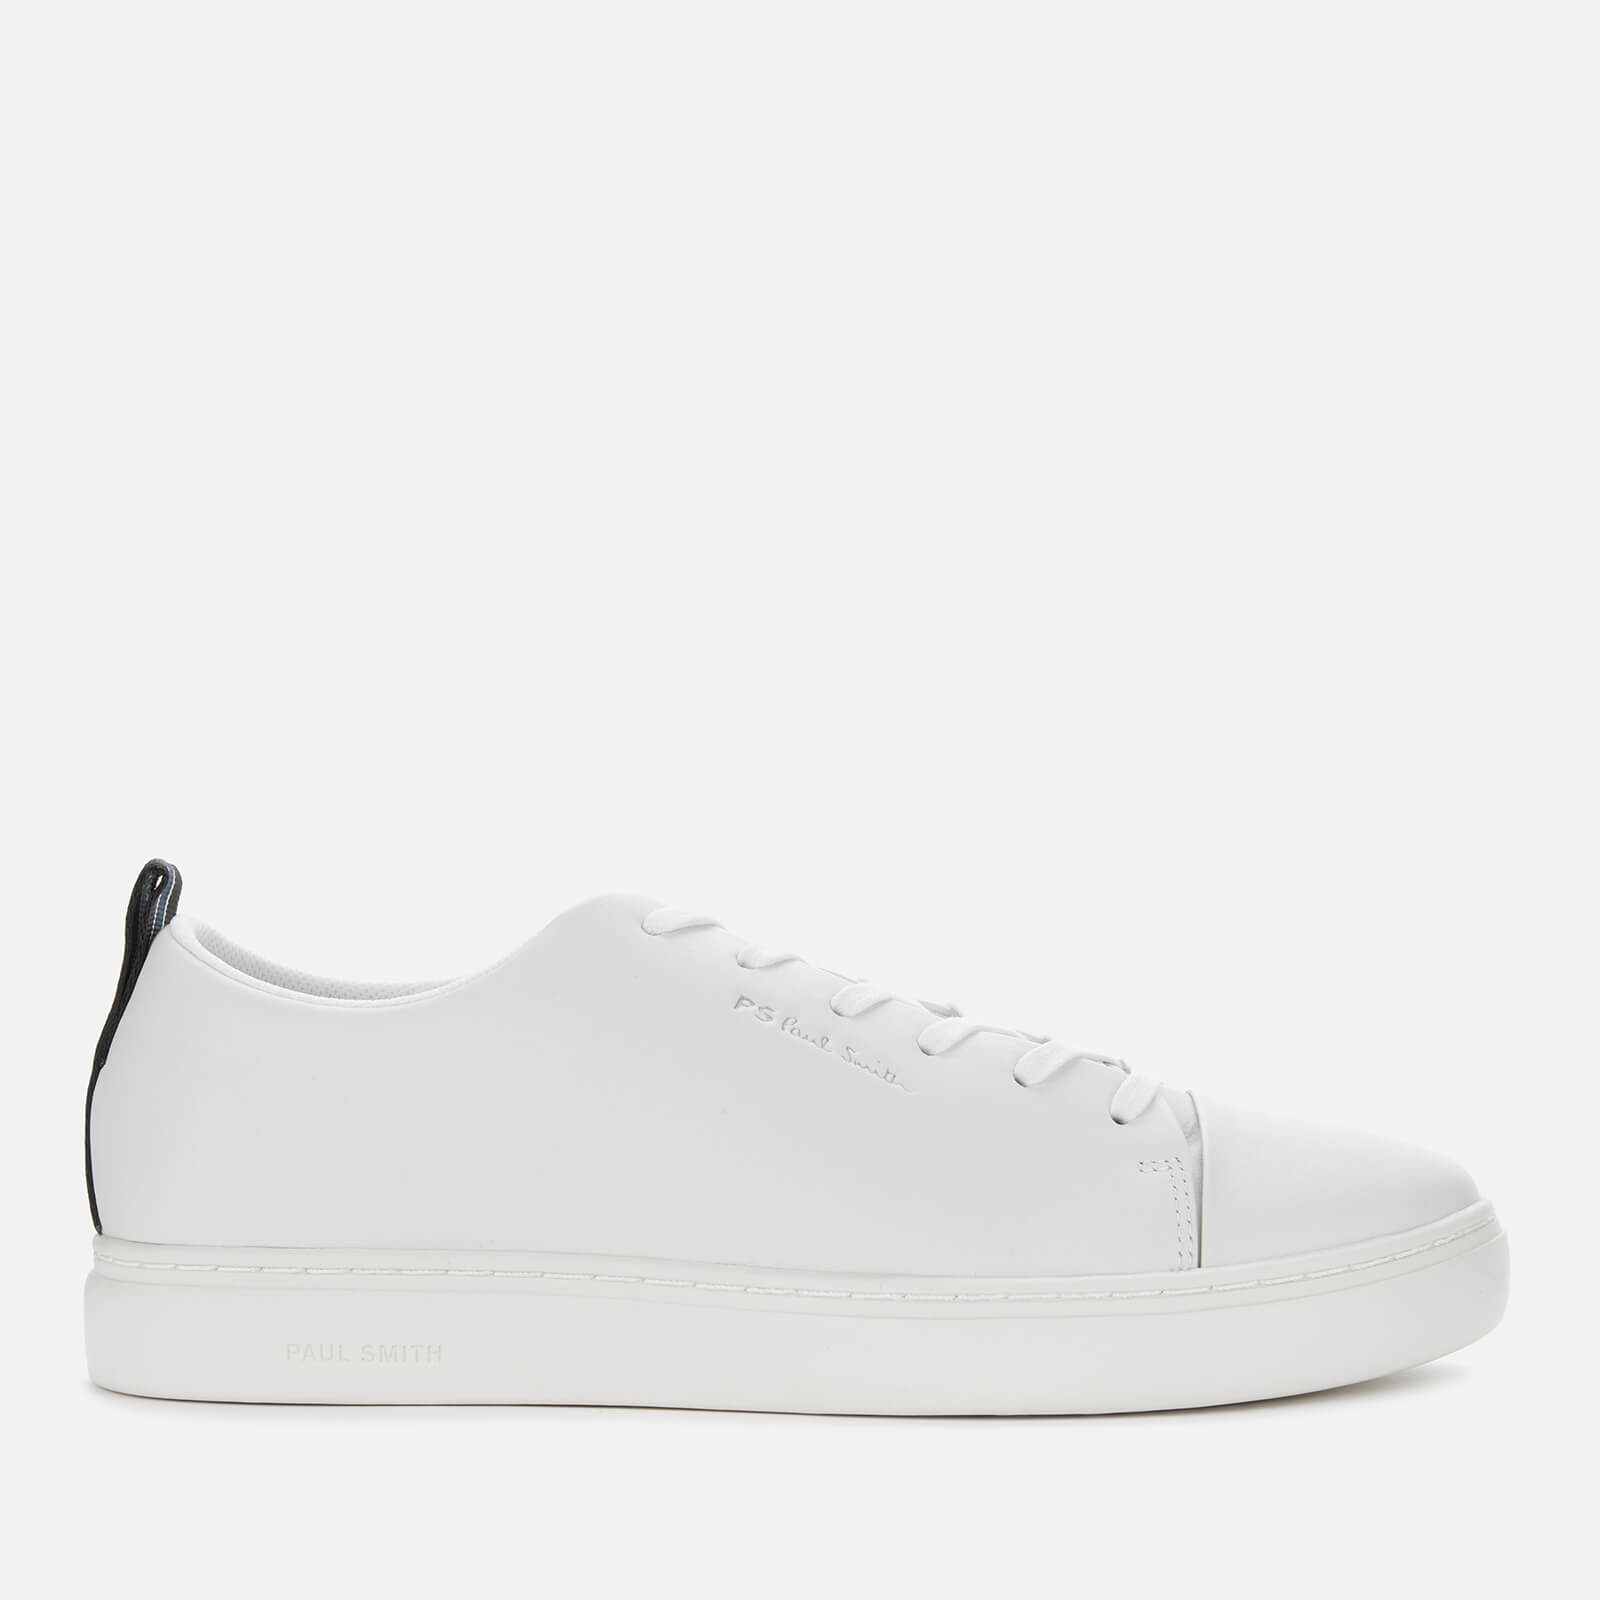 PS Paul Smith Men's Lee Leather Cupsole Trainers - White - 11